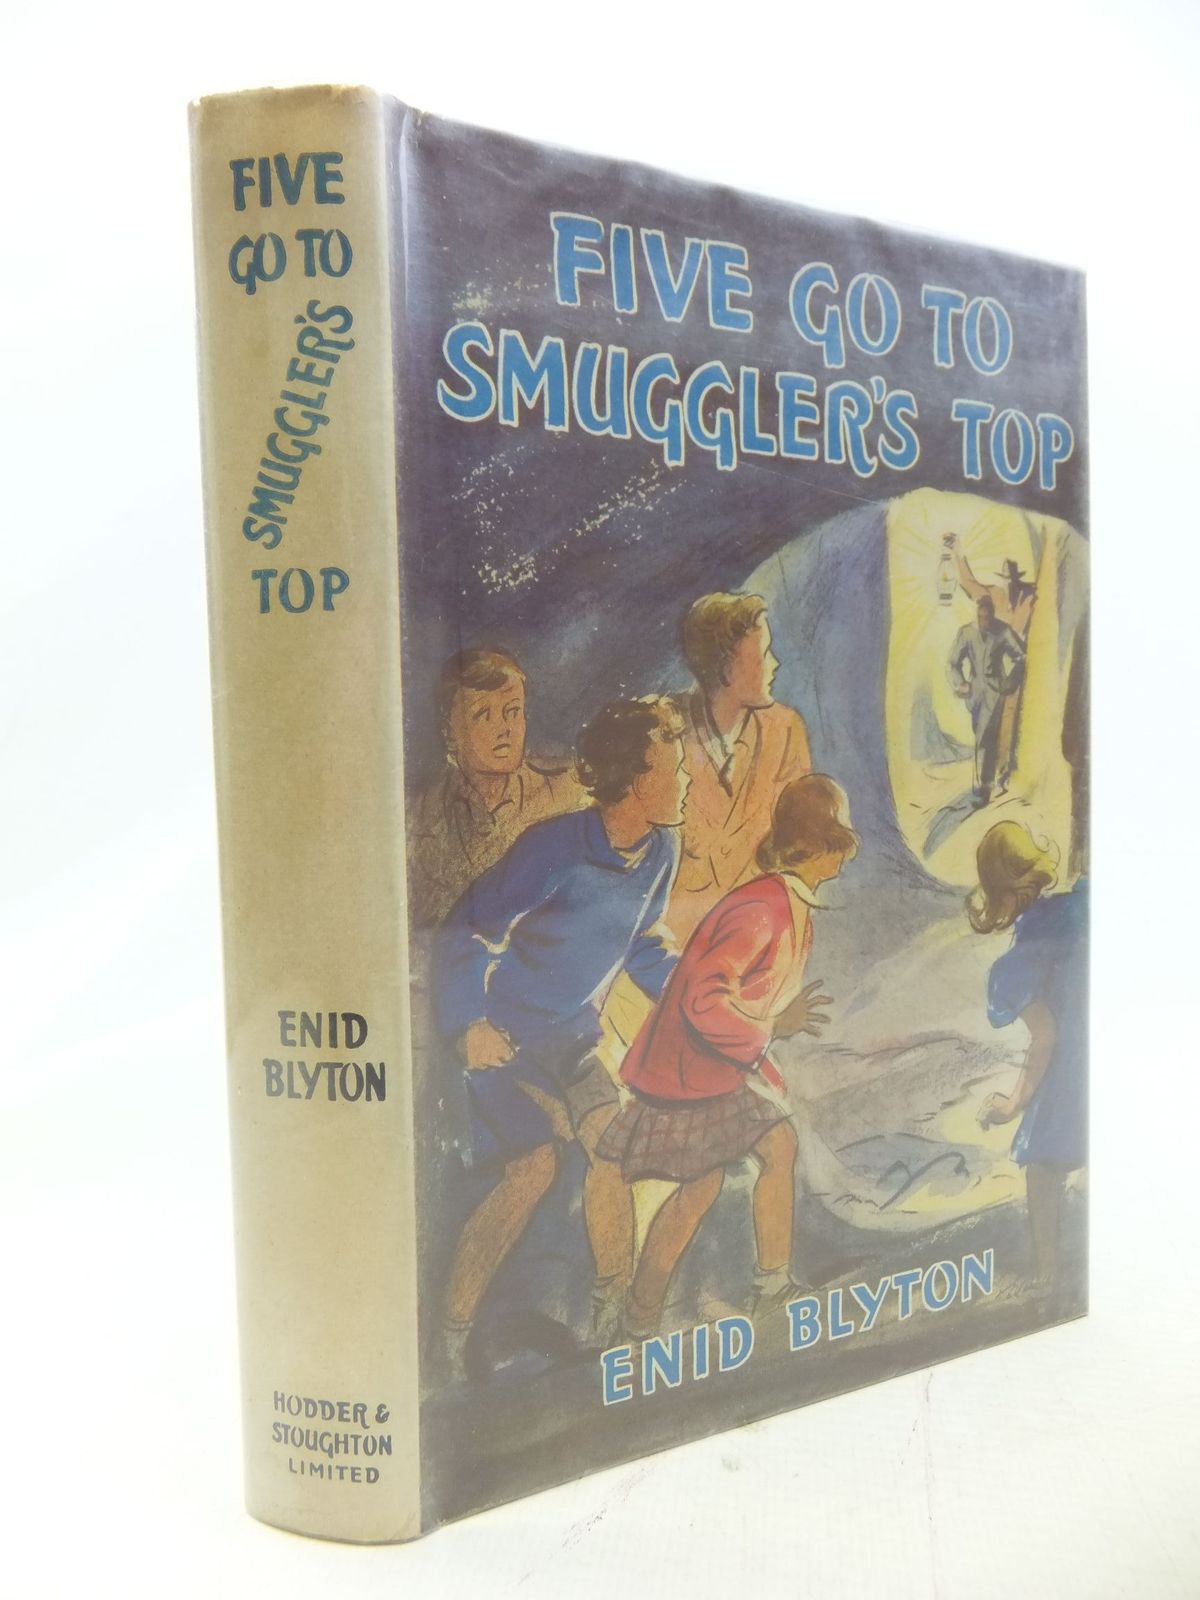 Cover of FIVE GO TO SMUGGLER'S TOP by Enid Blyton